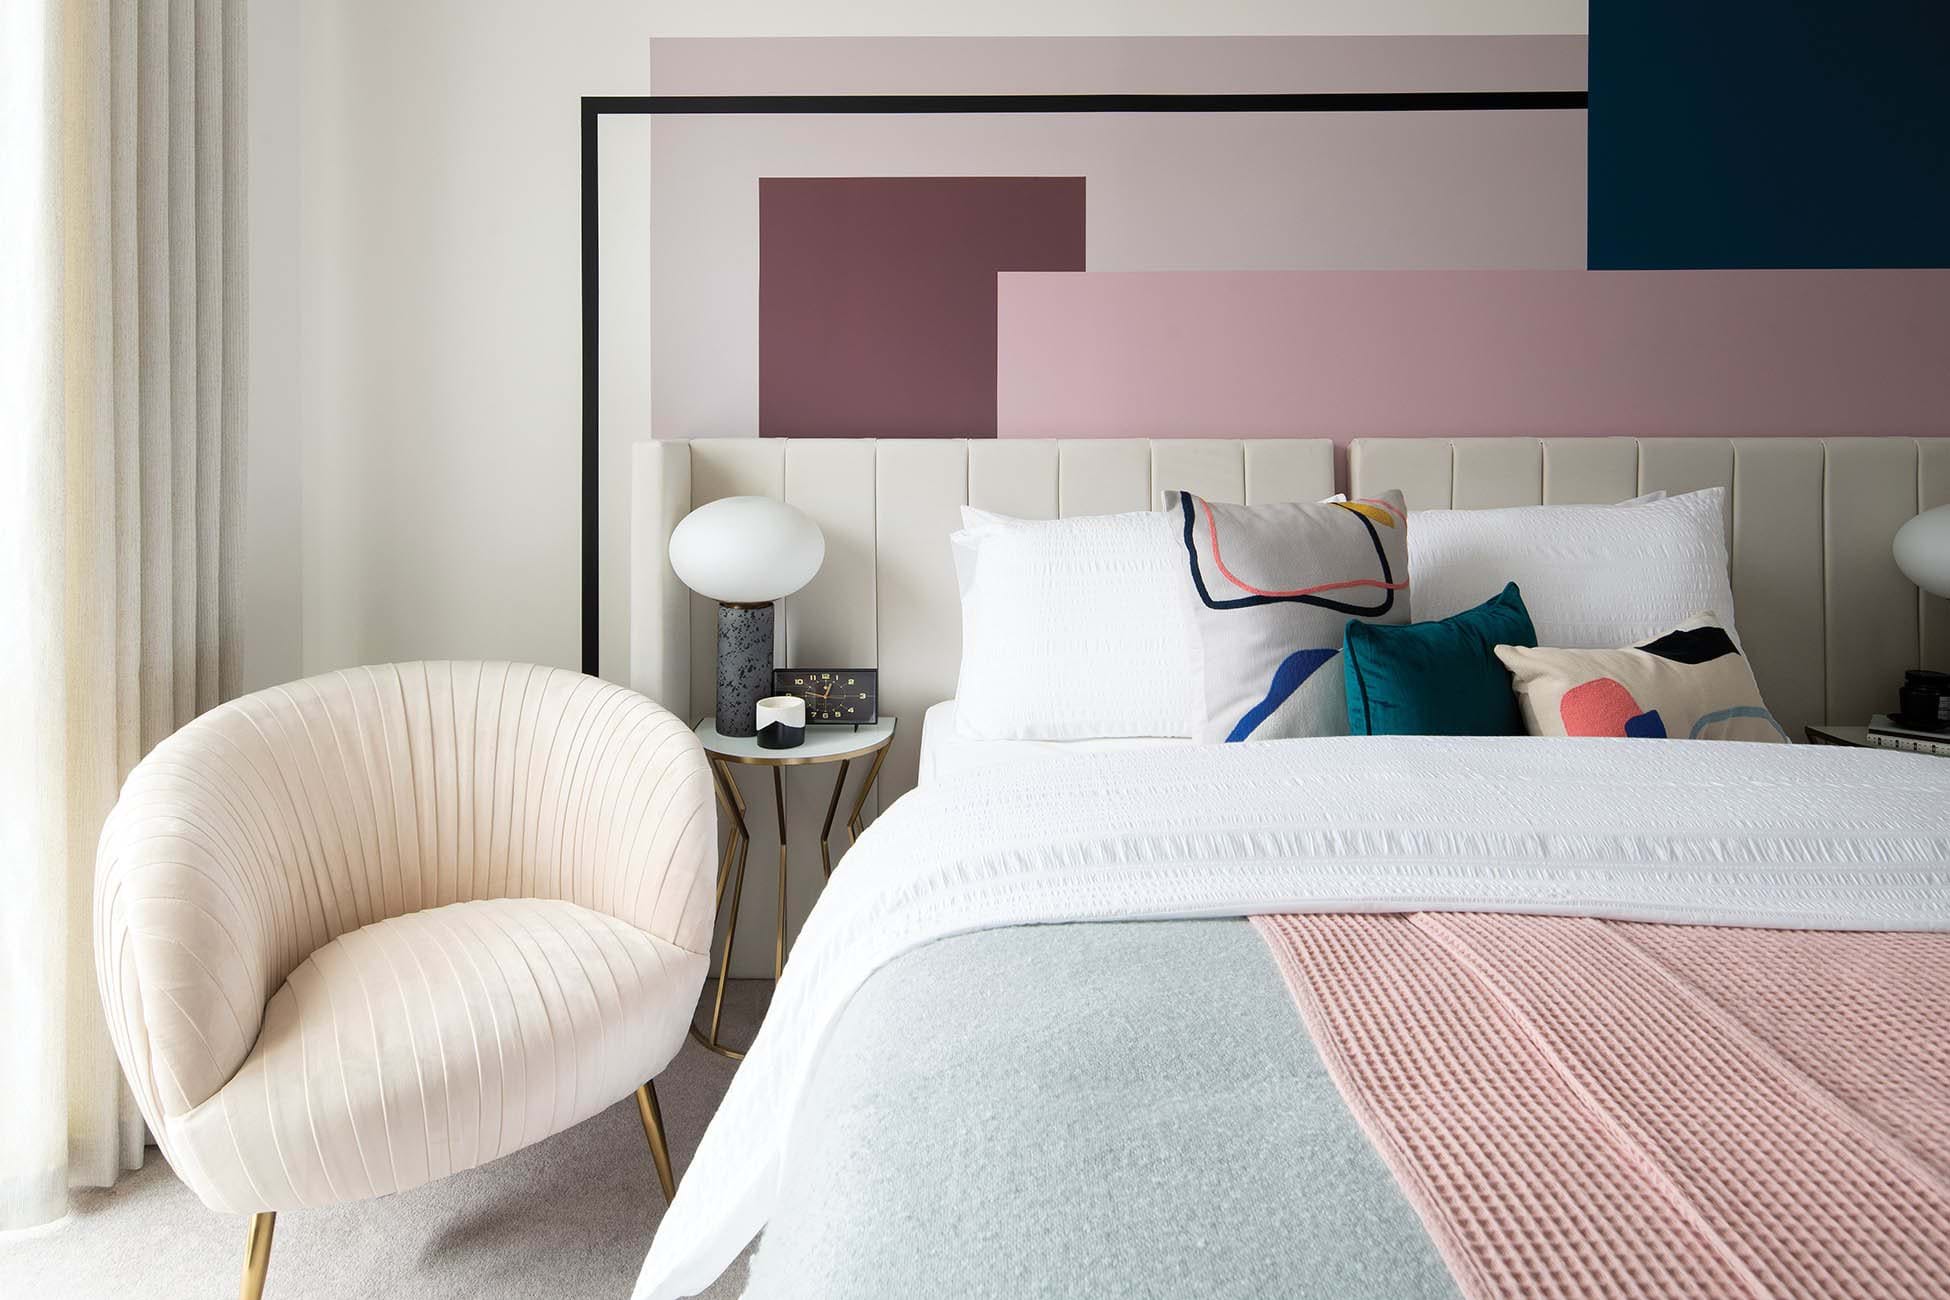 Using colour can help make a room look bigger.